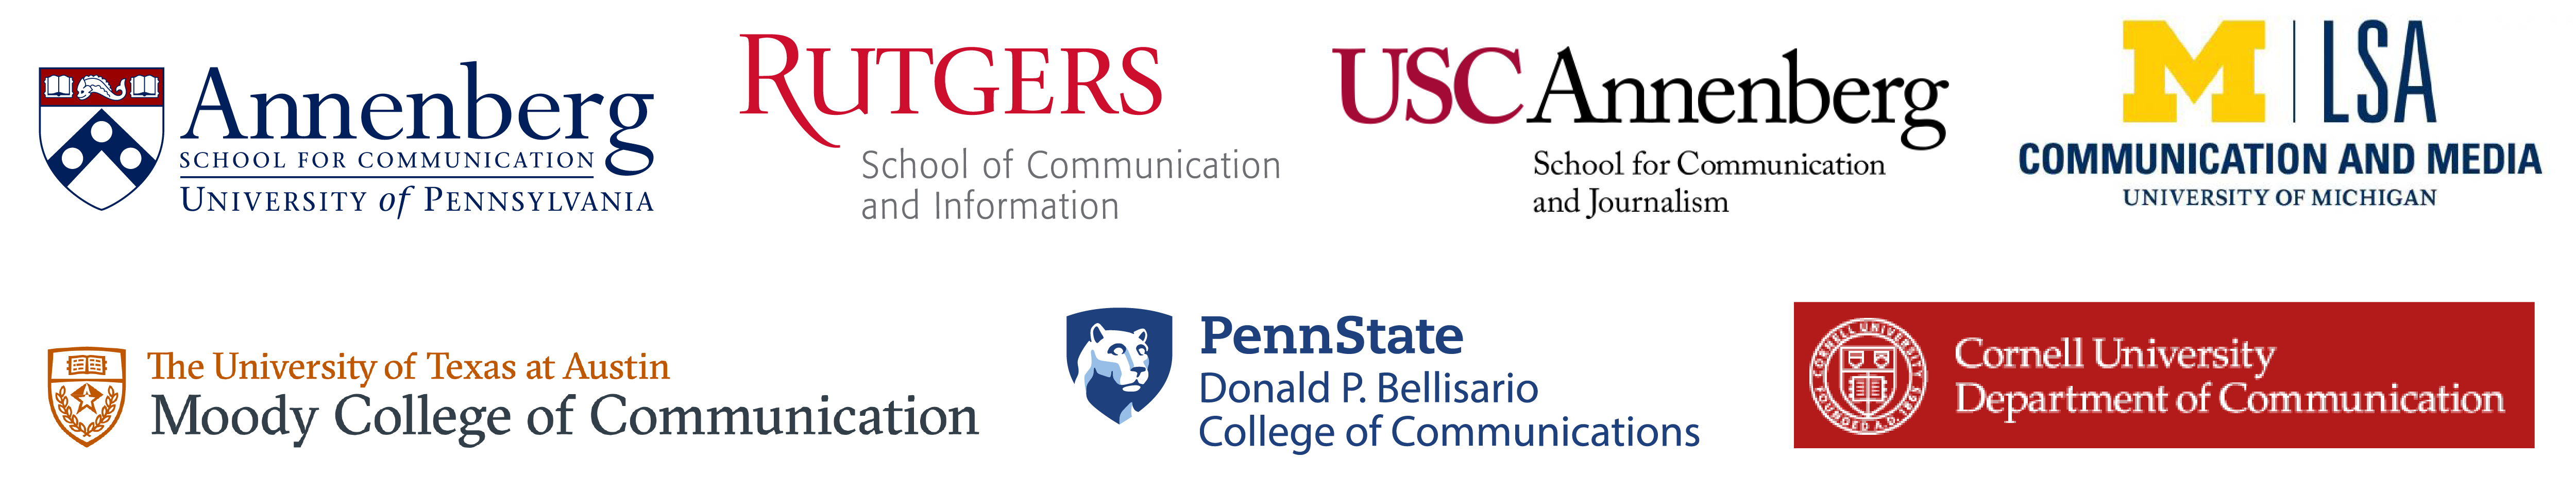 Logos for the Annenberg School for Communication at University of Pennsylvania, Rutgers University's School of Communication and Information, Penn State's Donald P. Bellisario College of Communications, the University of Michigan's Communication Studies department, the Annenberg School for Communication & Journalism at the University of Southern California, the University of Texas at Austin's Moody College of Communication, and Cornell University Department of Communication